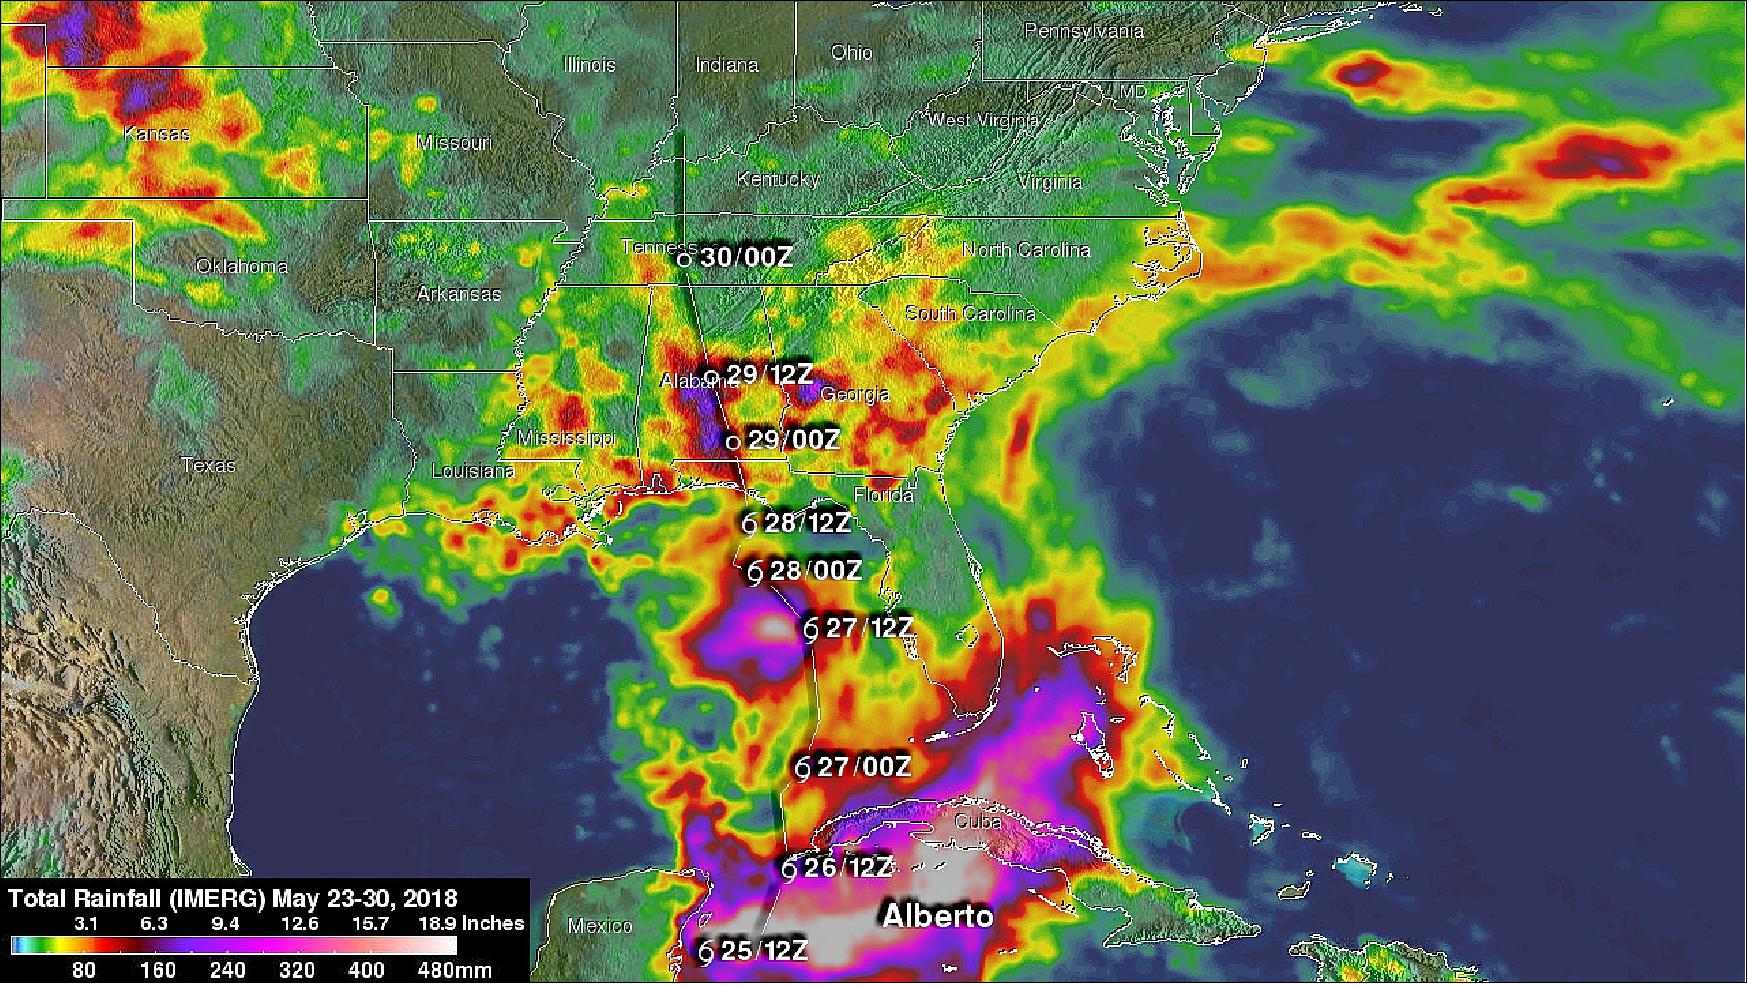 Figure 34: IMERG rainfall estimates were compiled for the 1-week period from May 23 at 4:30 a.m. EDT (08:30 UTC) to May 30 at 4 a.m. EDT (08:00 UTC) showed upwards of 500 mm of rain (~20 inches) over the northwestern Caribbean. Rainfall amounts of at least 5 to 15 inches (shown in dark red, purple and pink) cover most of western Cuba (image credit: NASA/JAXA, Hal Pierce)